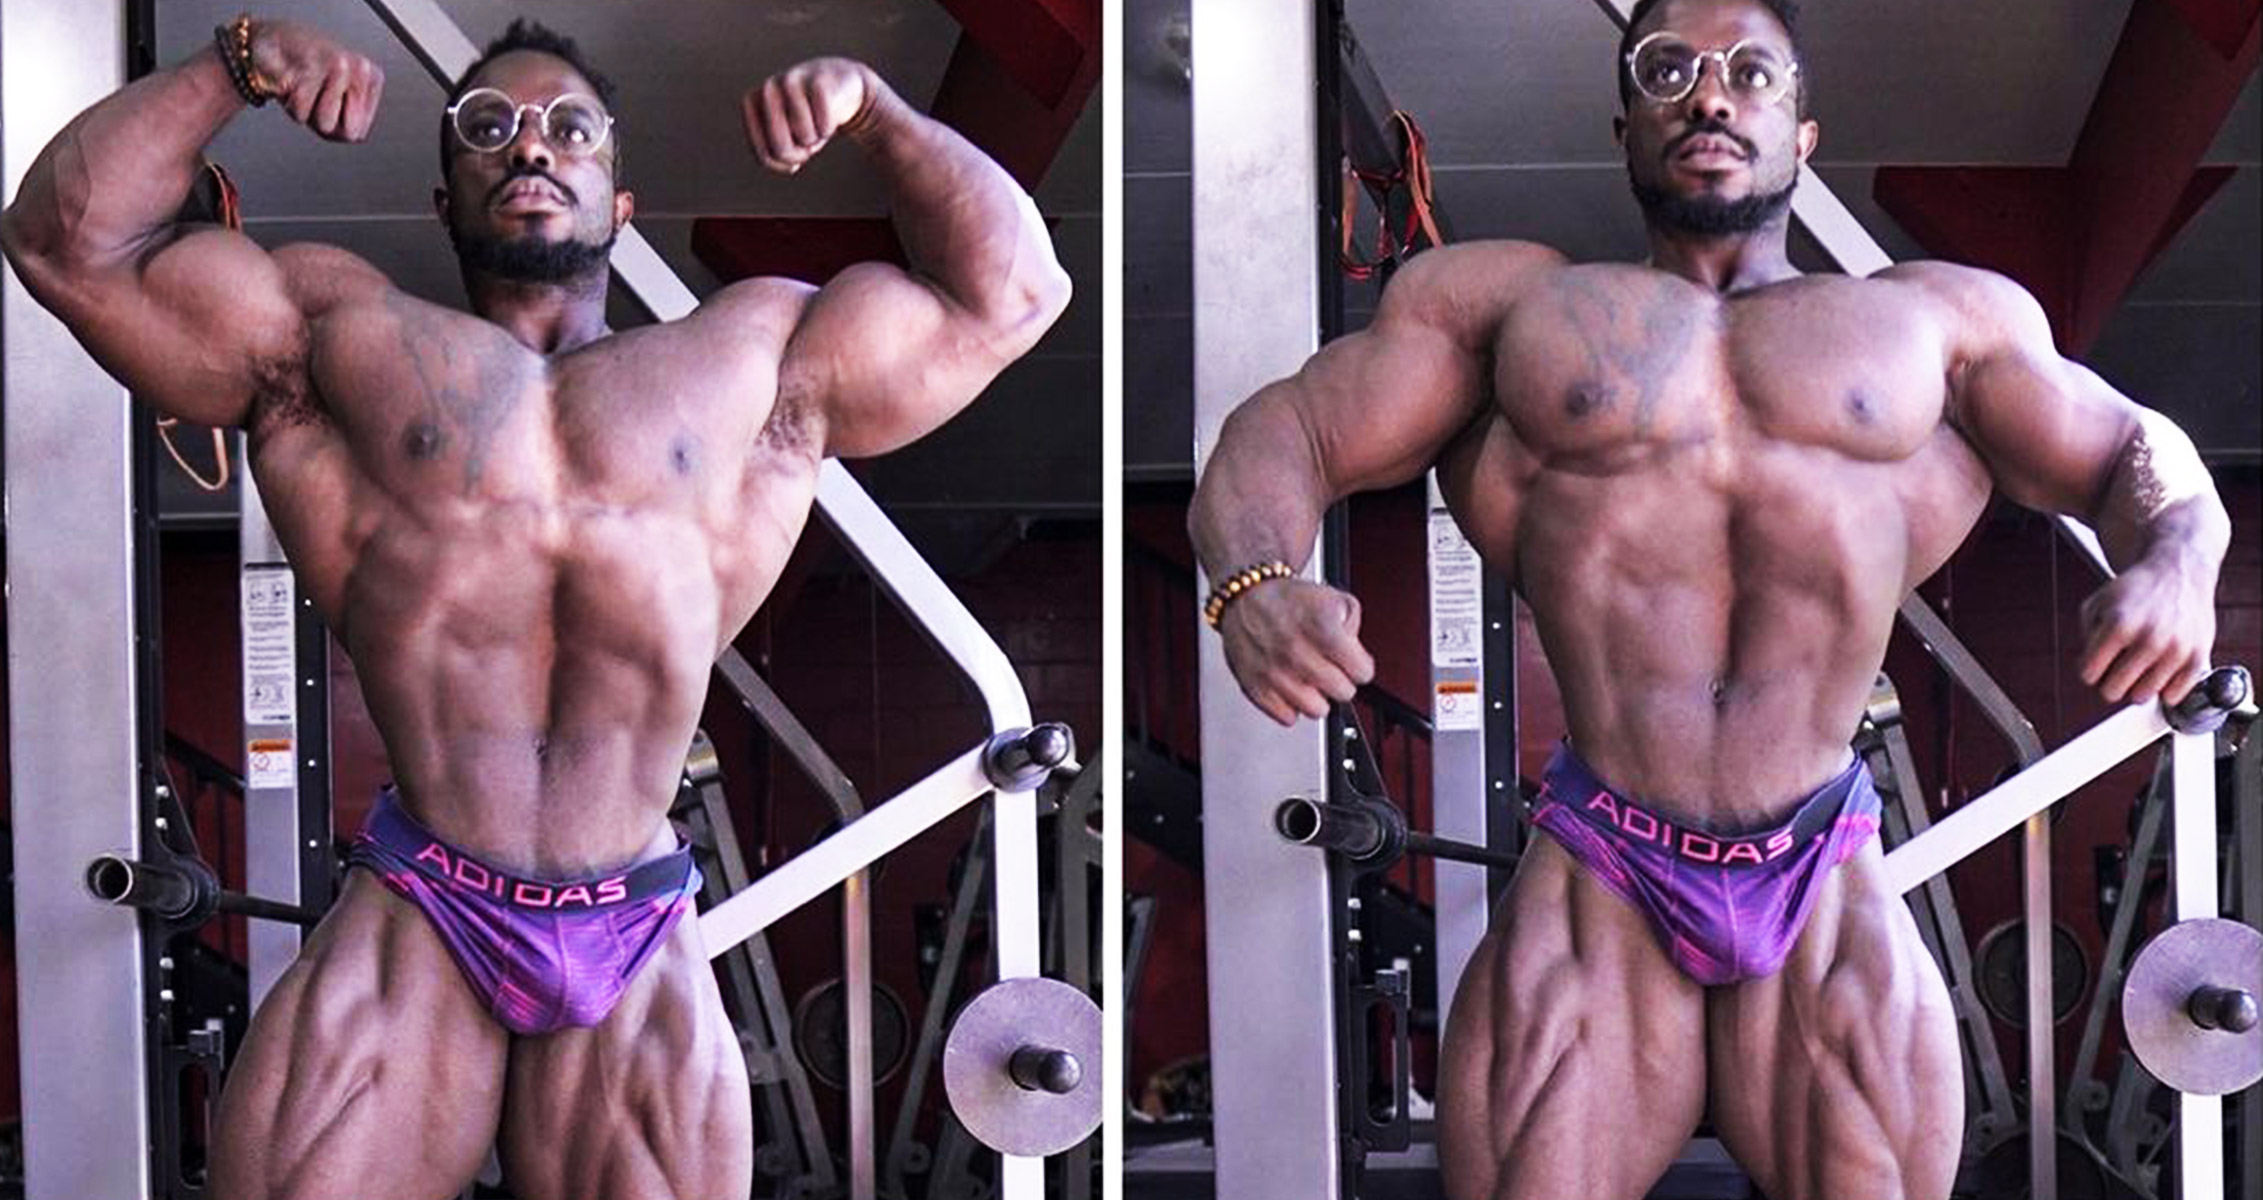 Terrence-Ruffin-Physique-Update-3-Weeks-Out.jpg